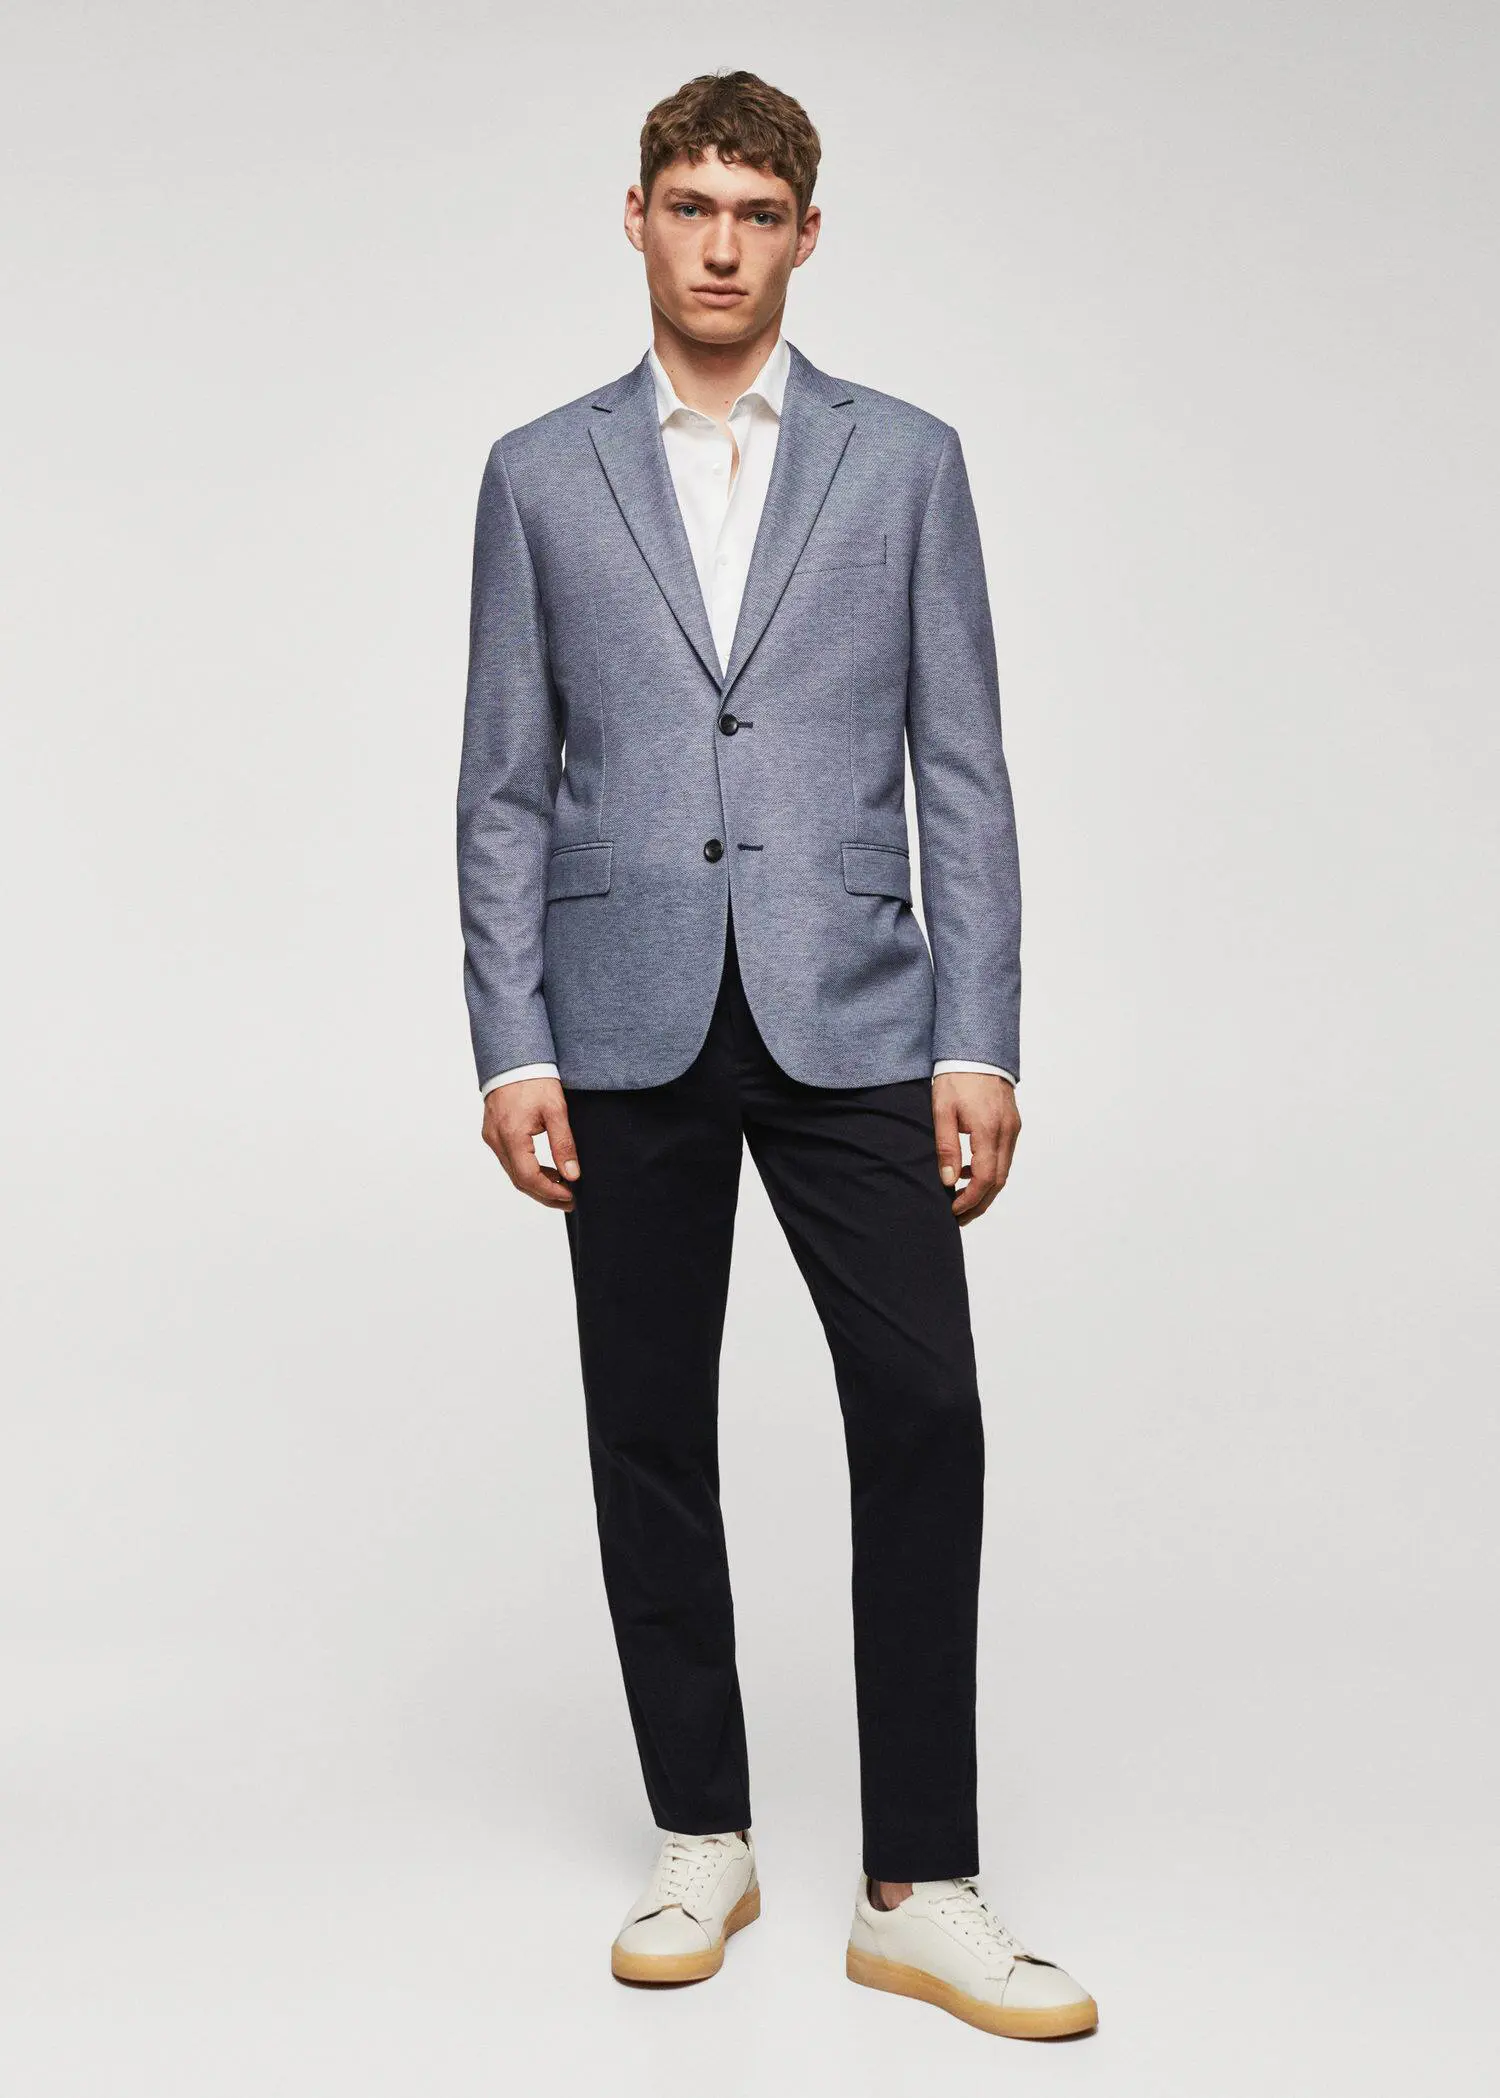 Mango Slim fit microstructure blazer. a man wearing a suit and tie standing in front of a white wall. 